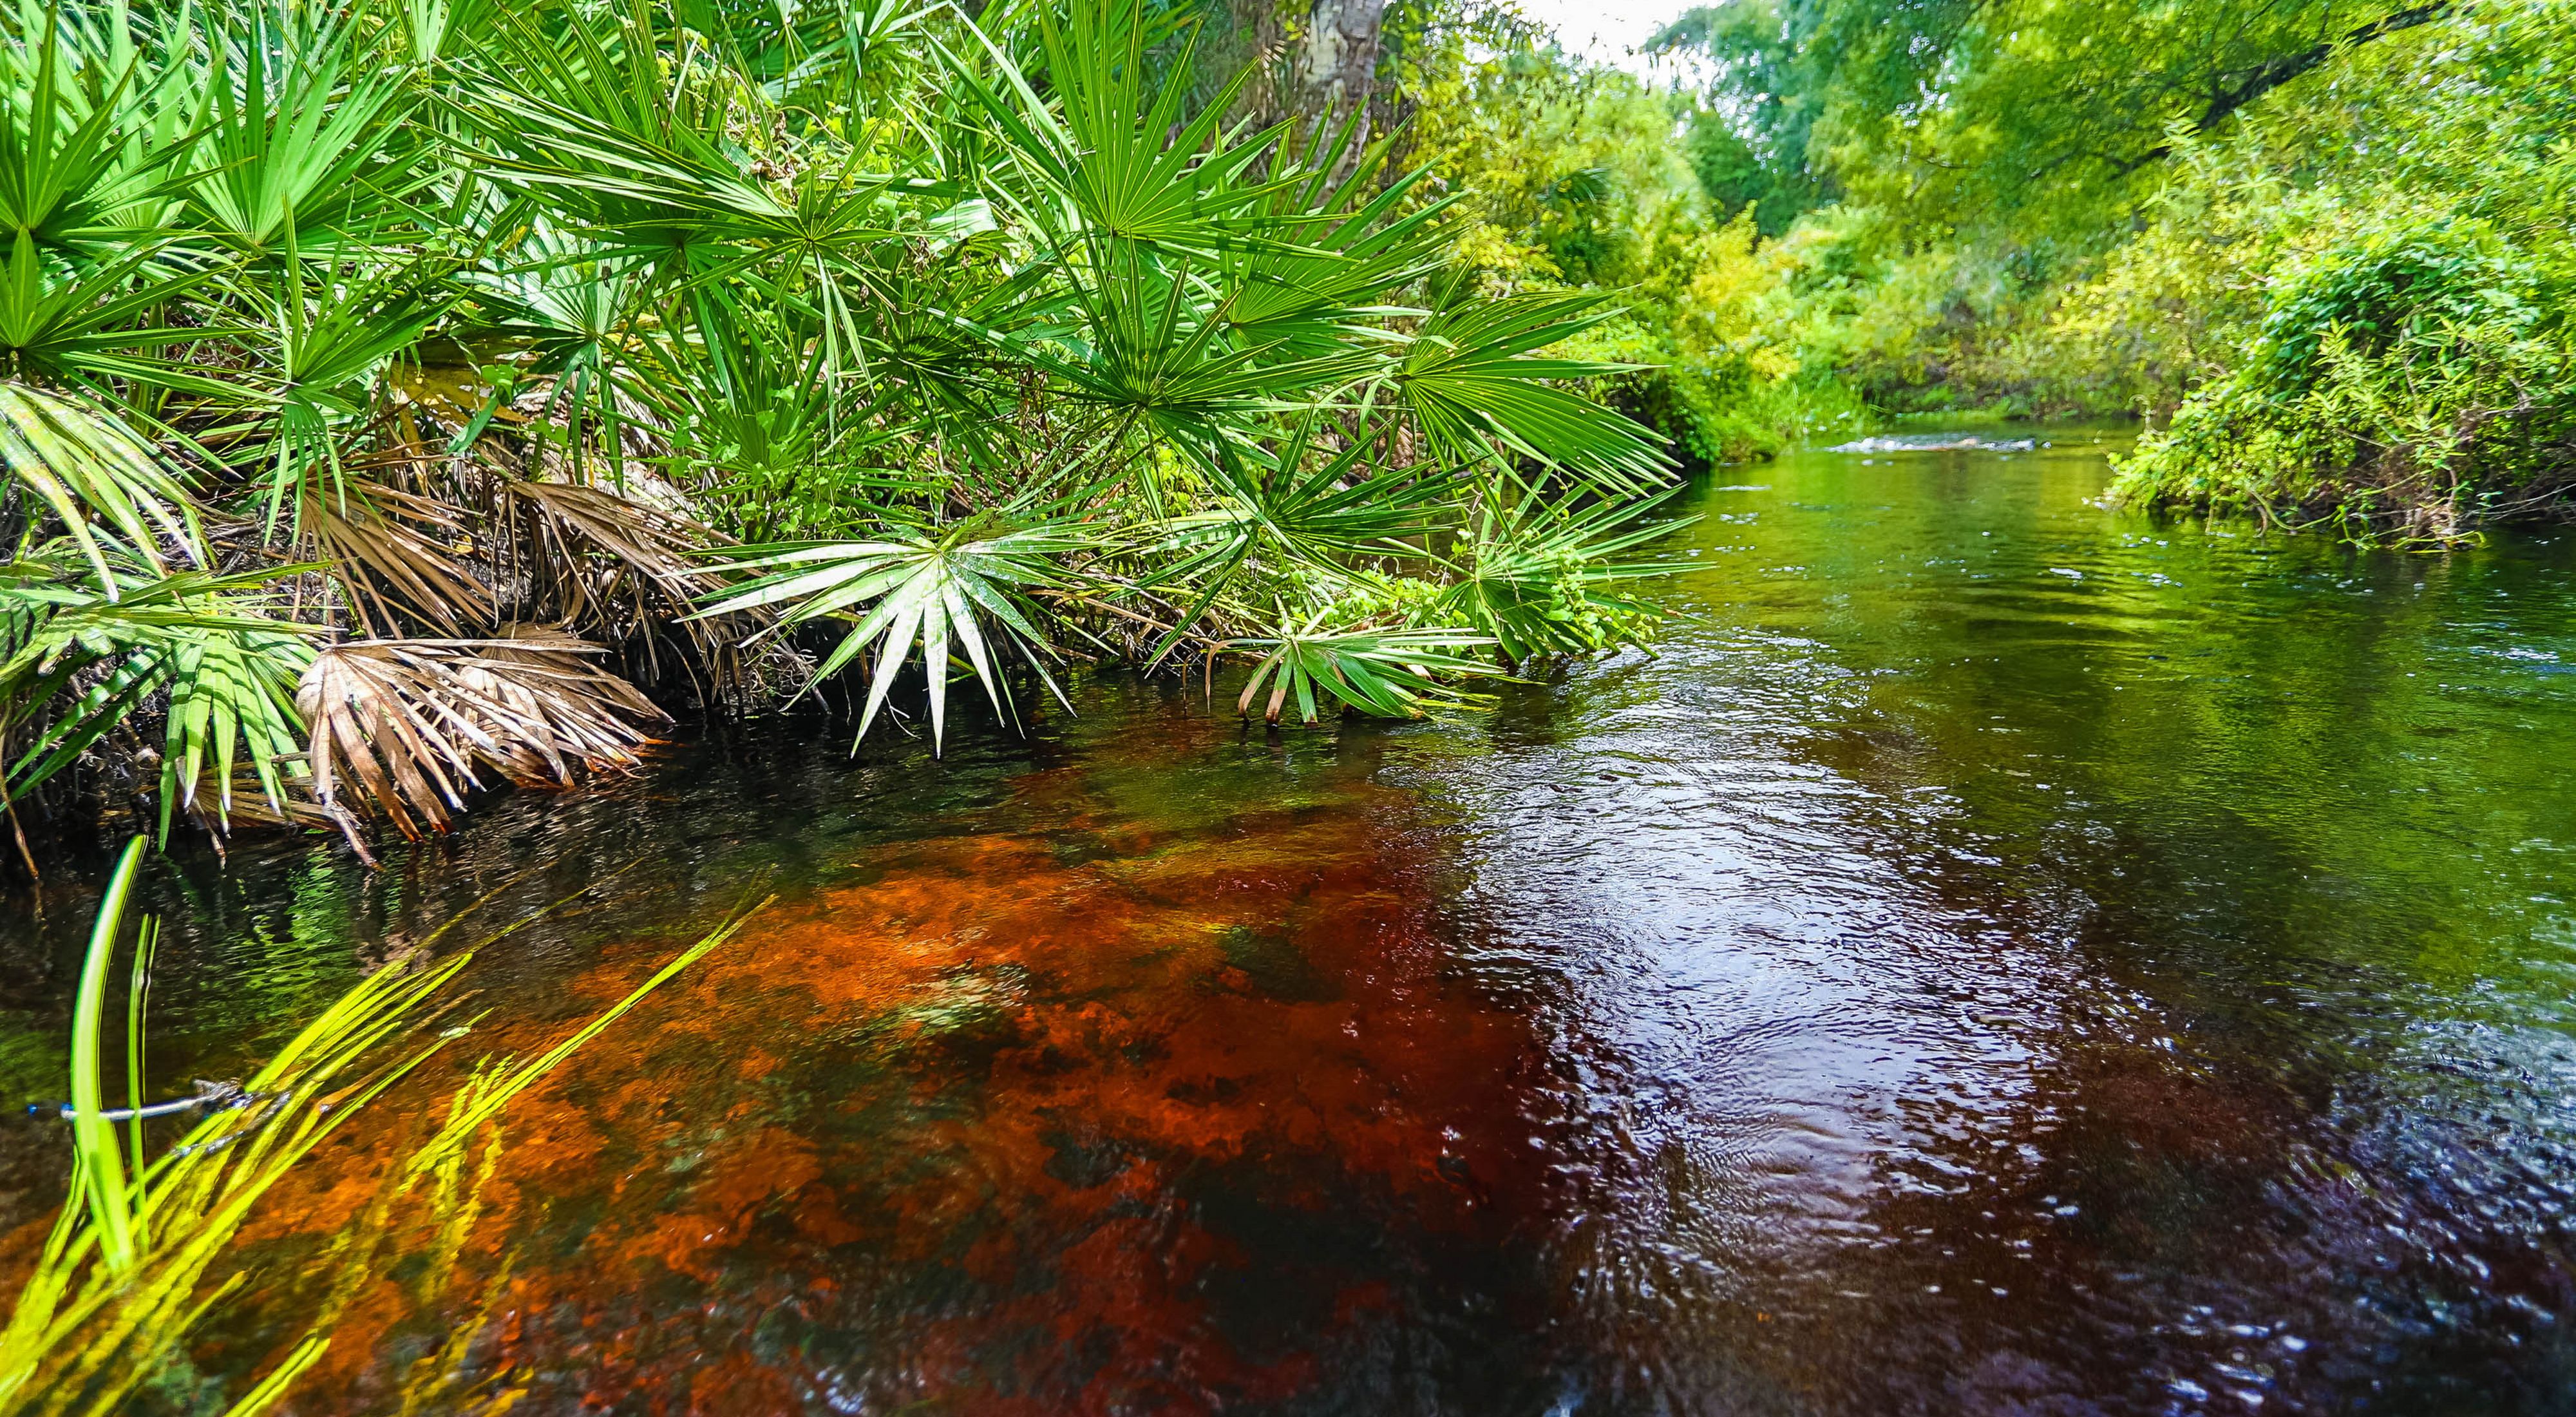 A patch of submerged orange vegetation in Tiger Creek with lush green plants along the banks.